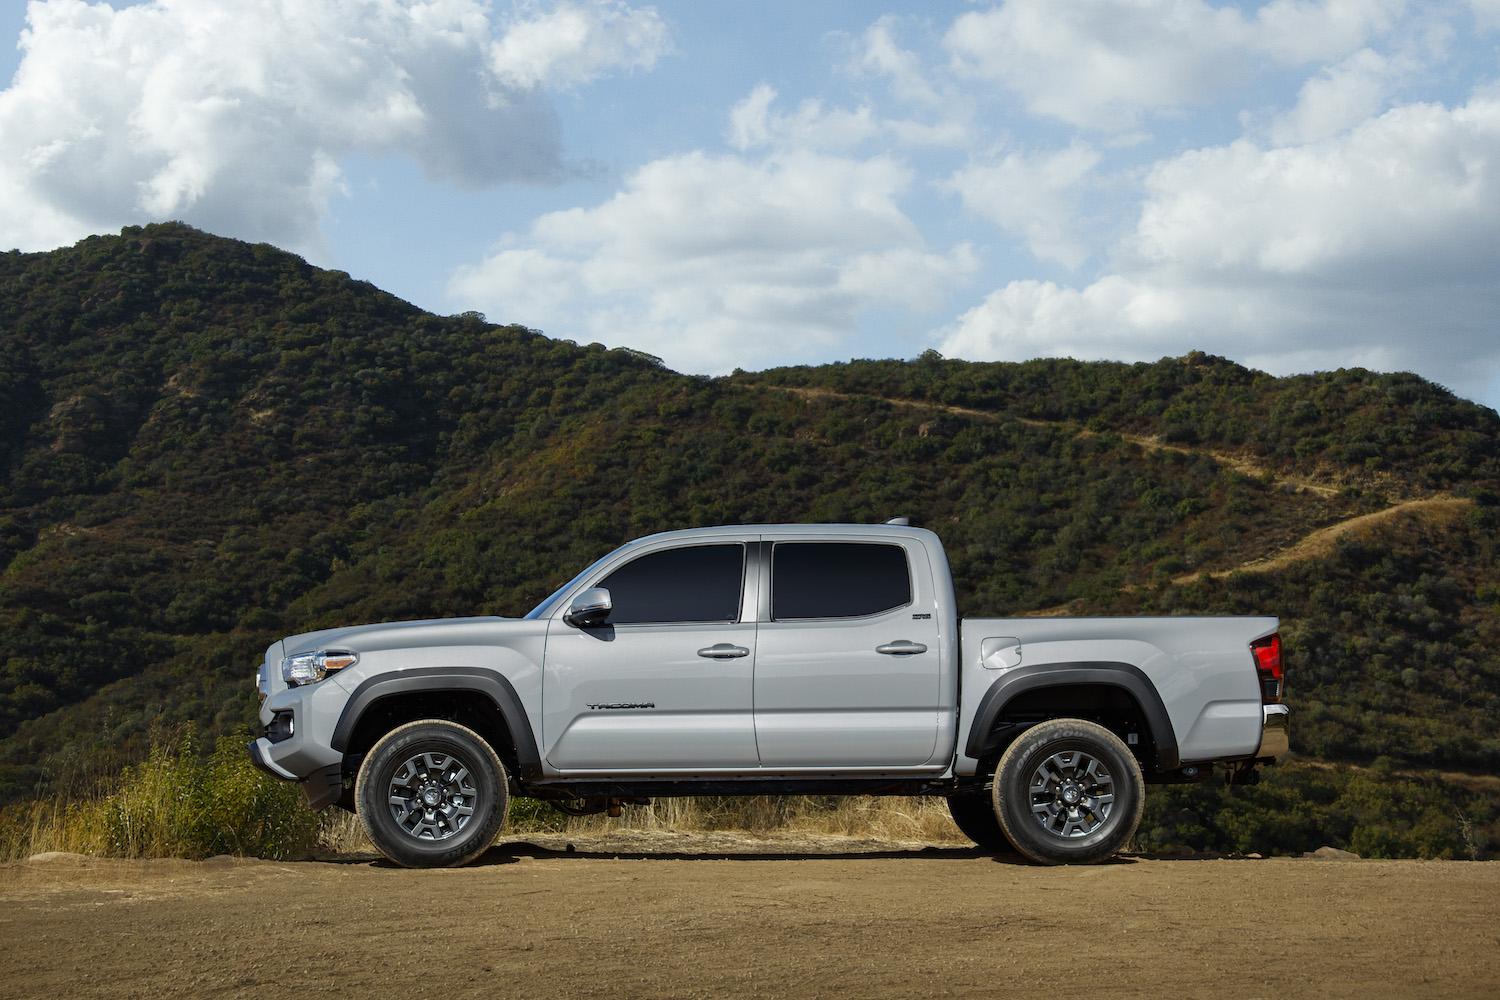 Your Toyota Tacoma Should Last a Long Time – But How Long? - ToysMatrix